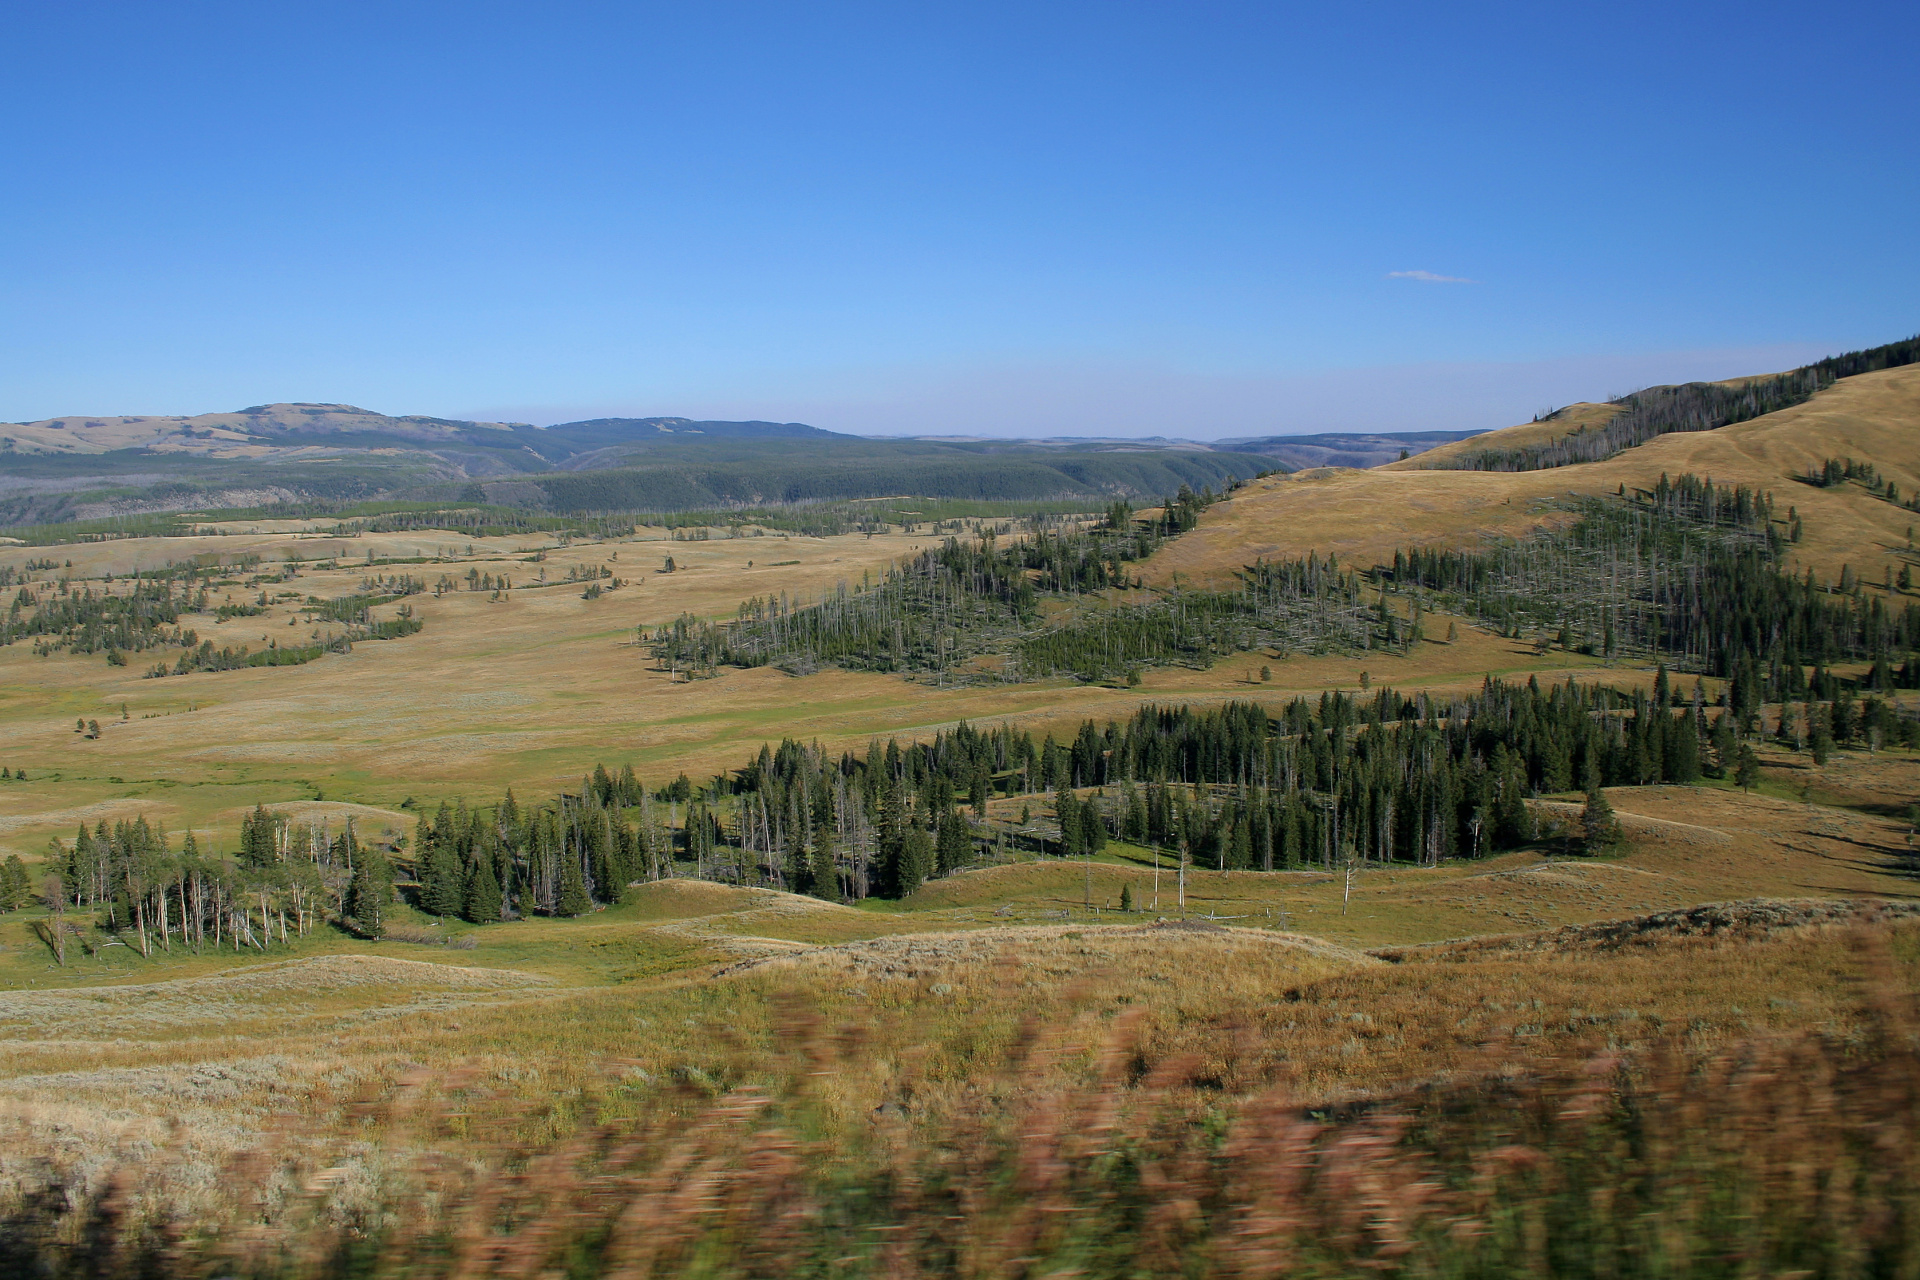 Yellowstone River Valley (Travels » US Trip 1: Cheyenne Country » The Journey » Yellowstone National Park)